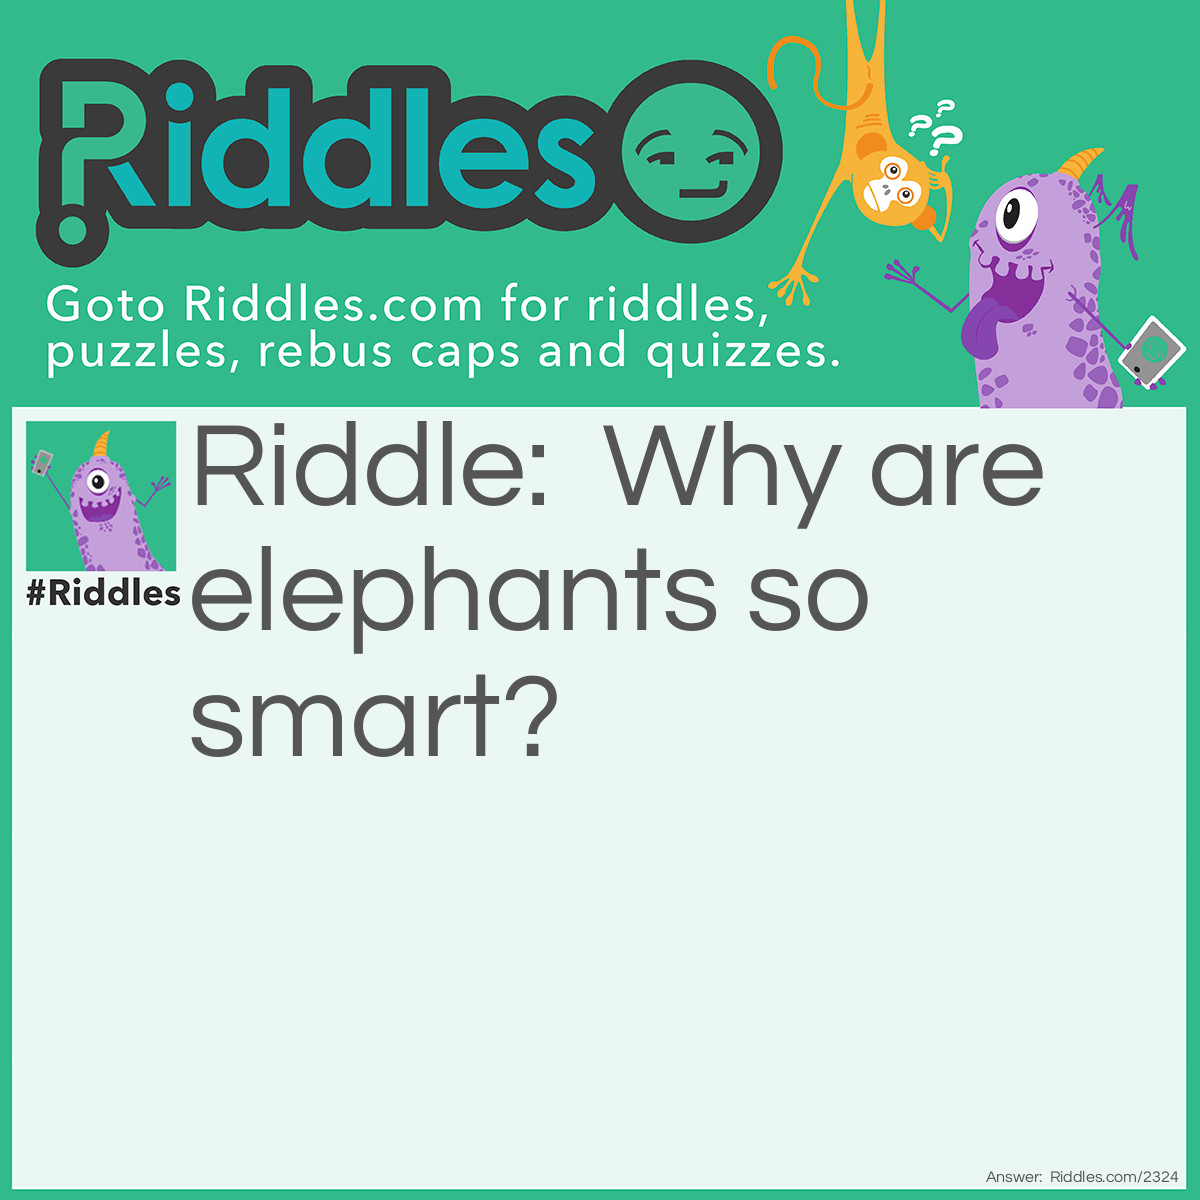 Riddle: Why are elephants so smart? Answer: Because they have lots of gray matter.